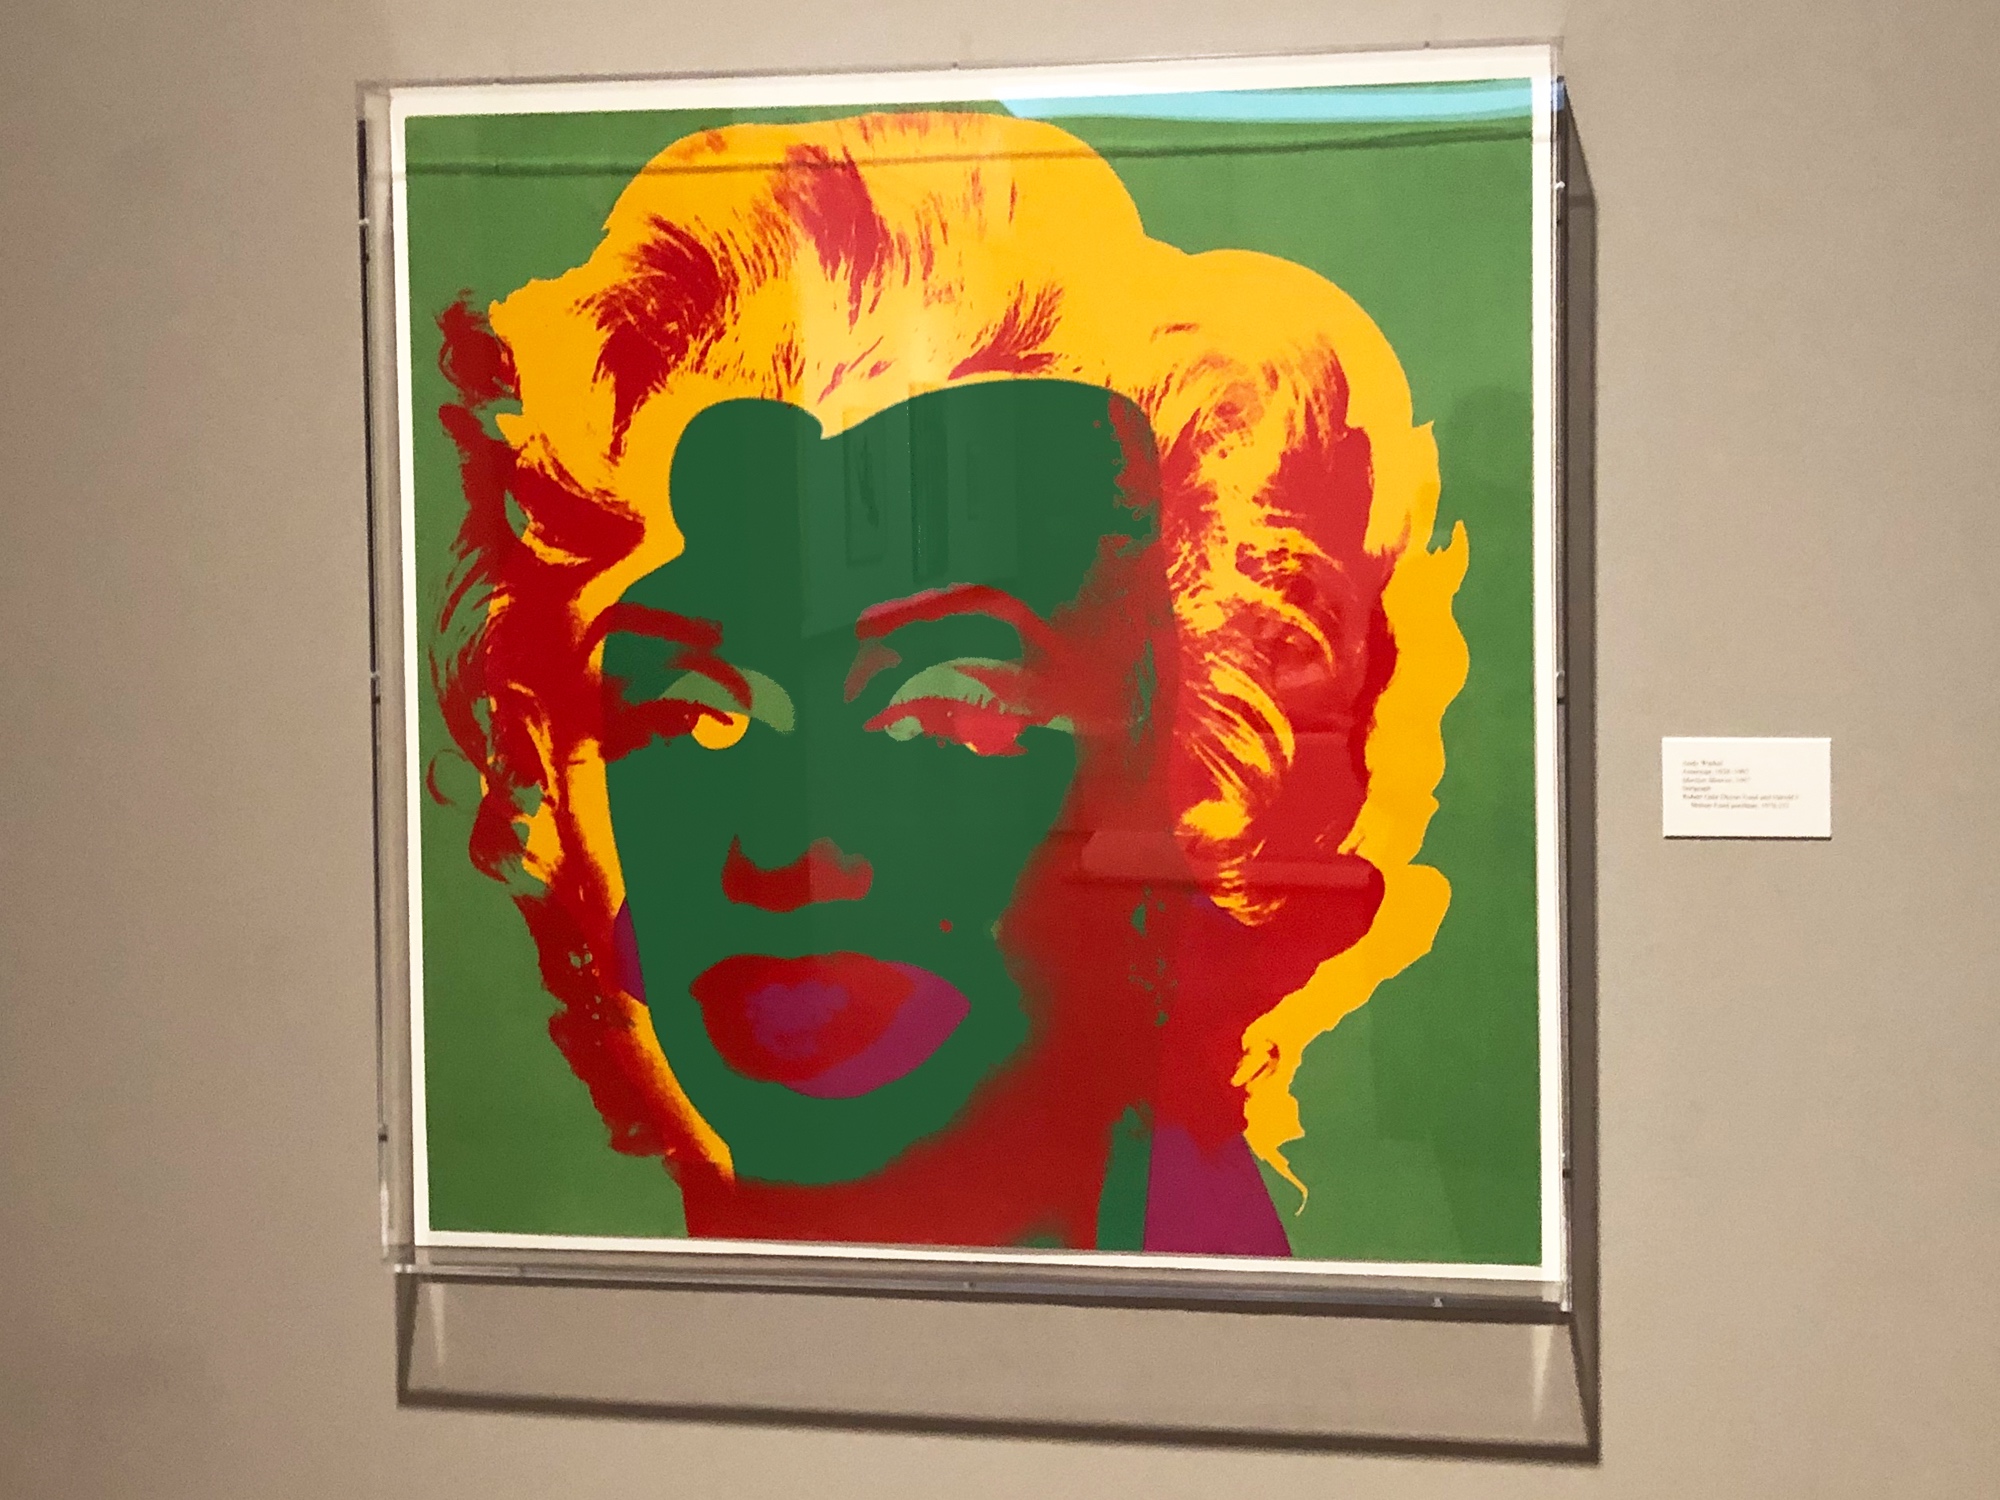 1967 screen print of Marilyn Monroe by Andy Warhol at the Chazen Museum of Art.